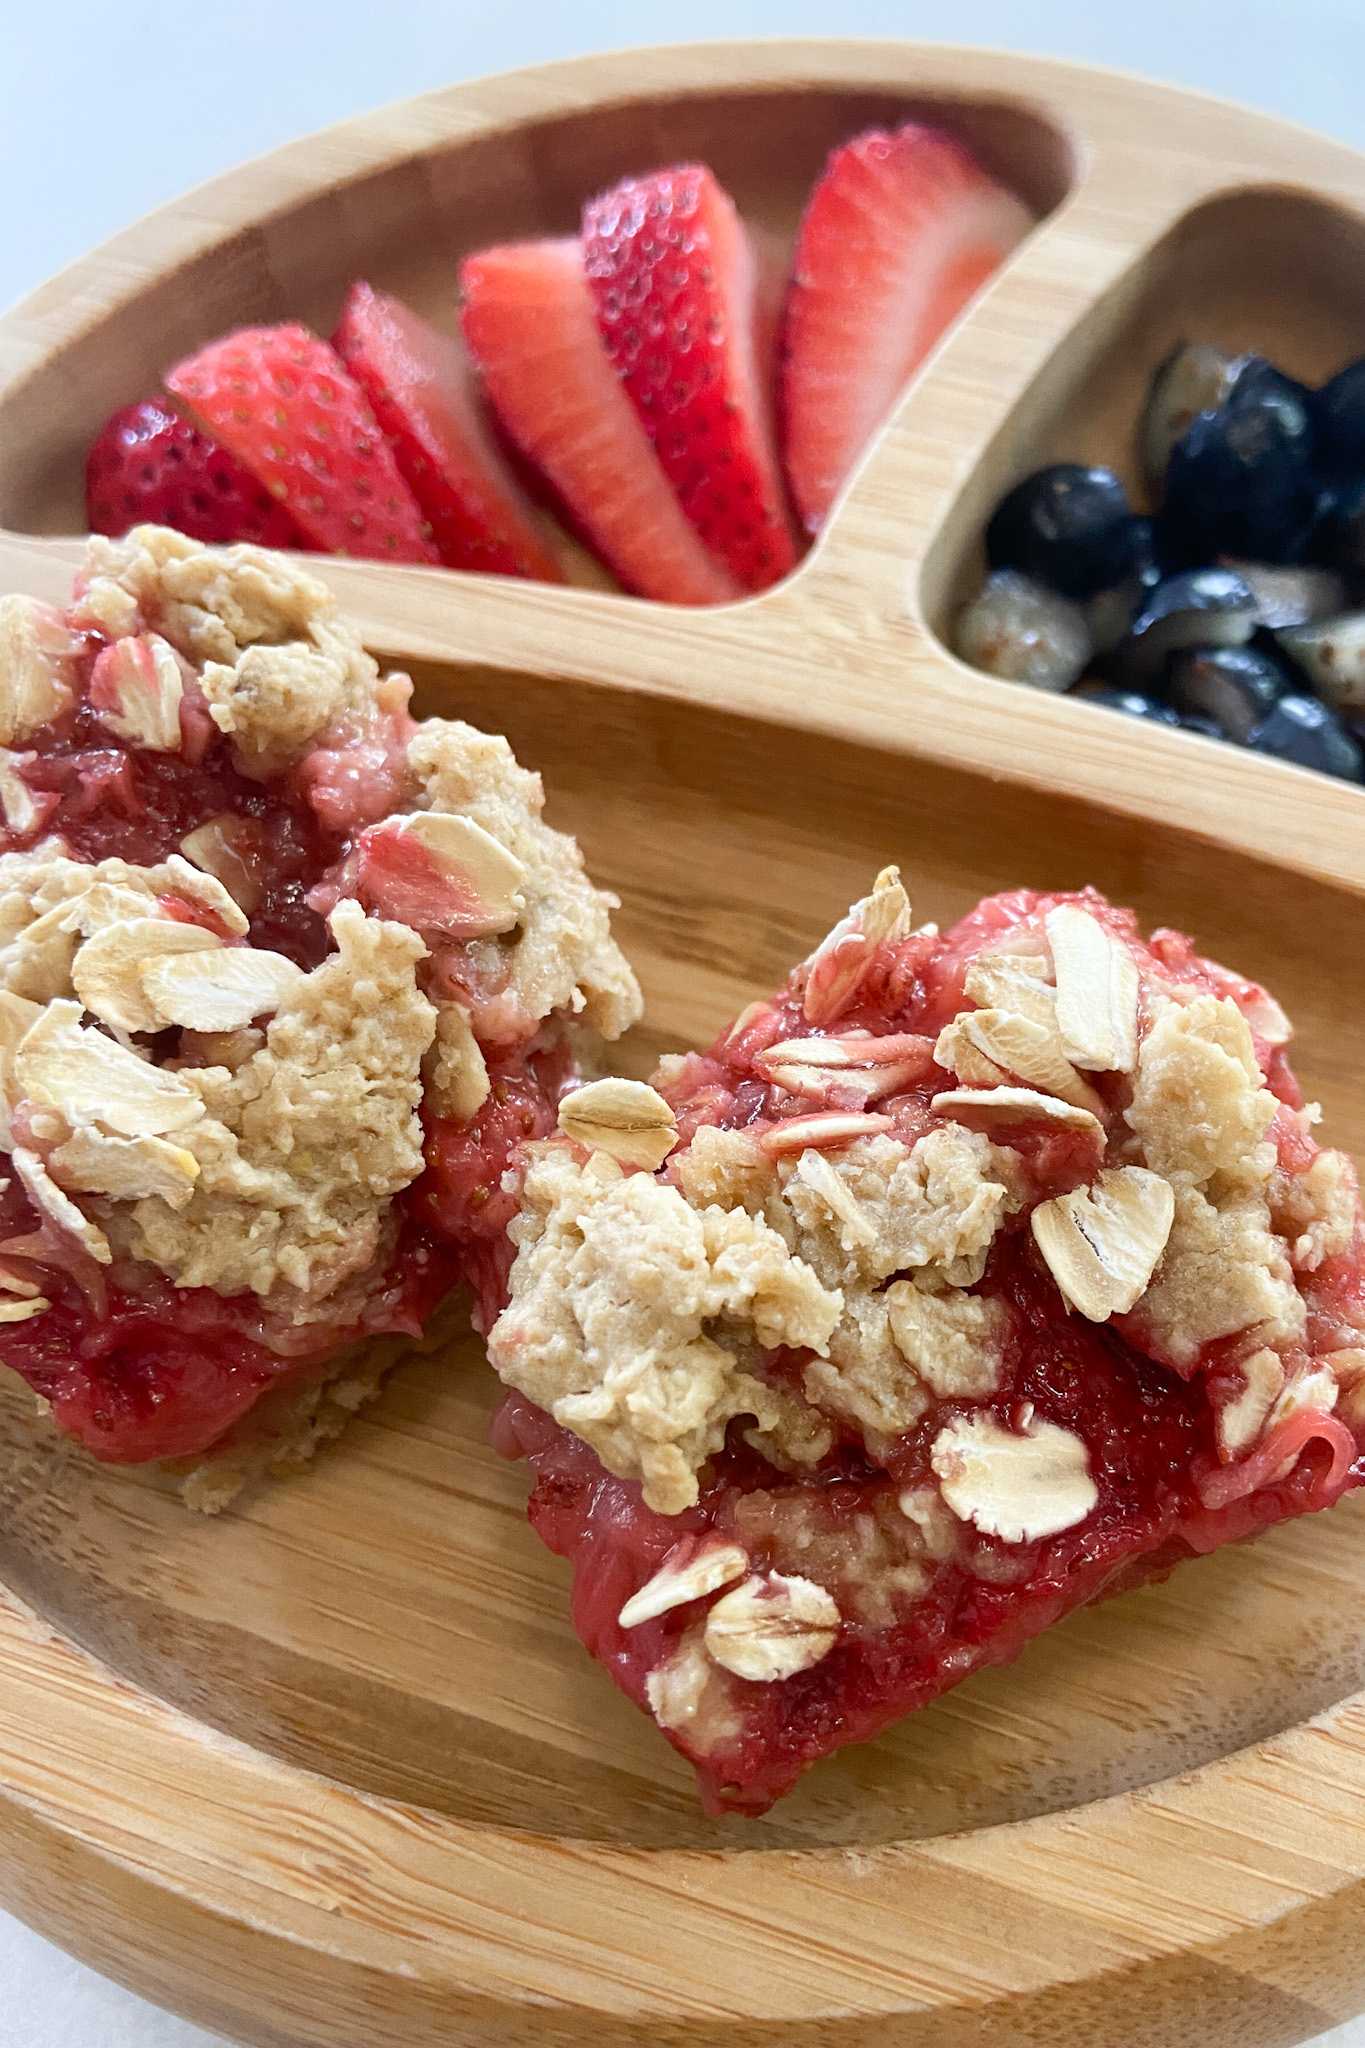 Strawberry crumble bars served with fruits